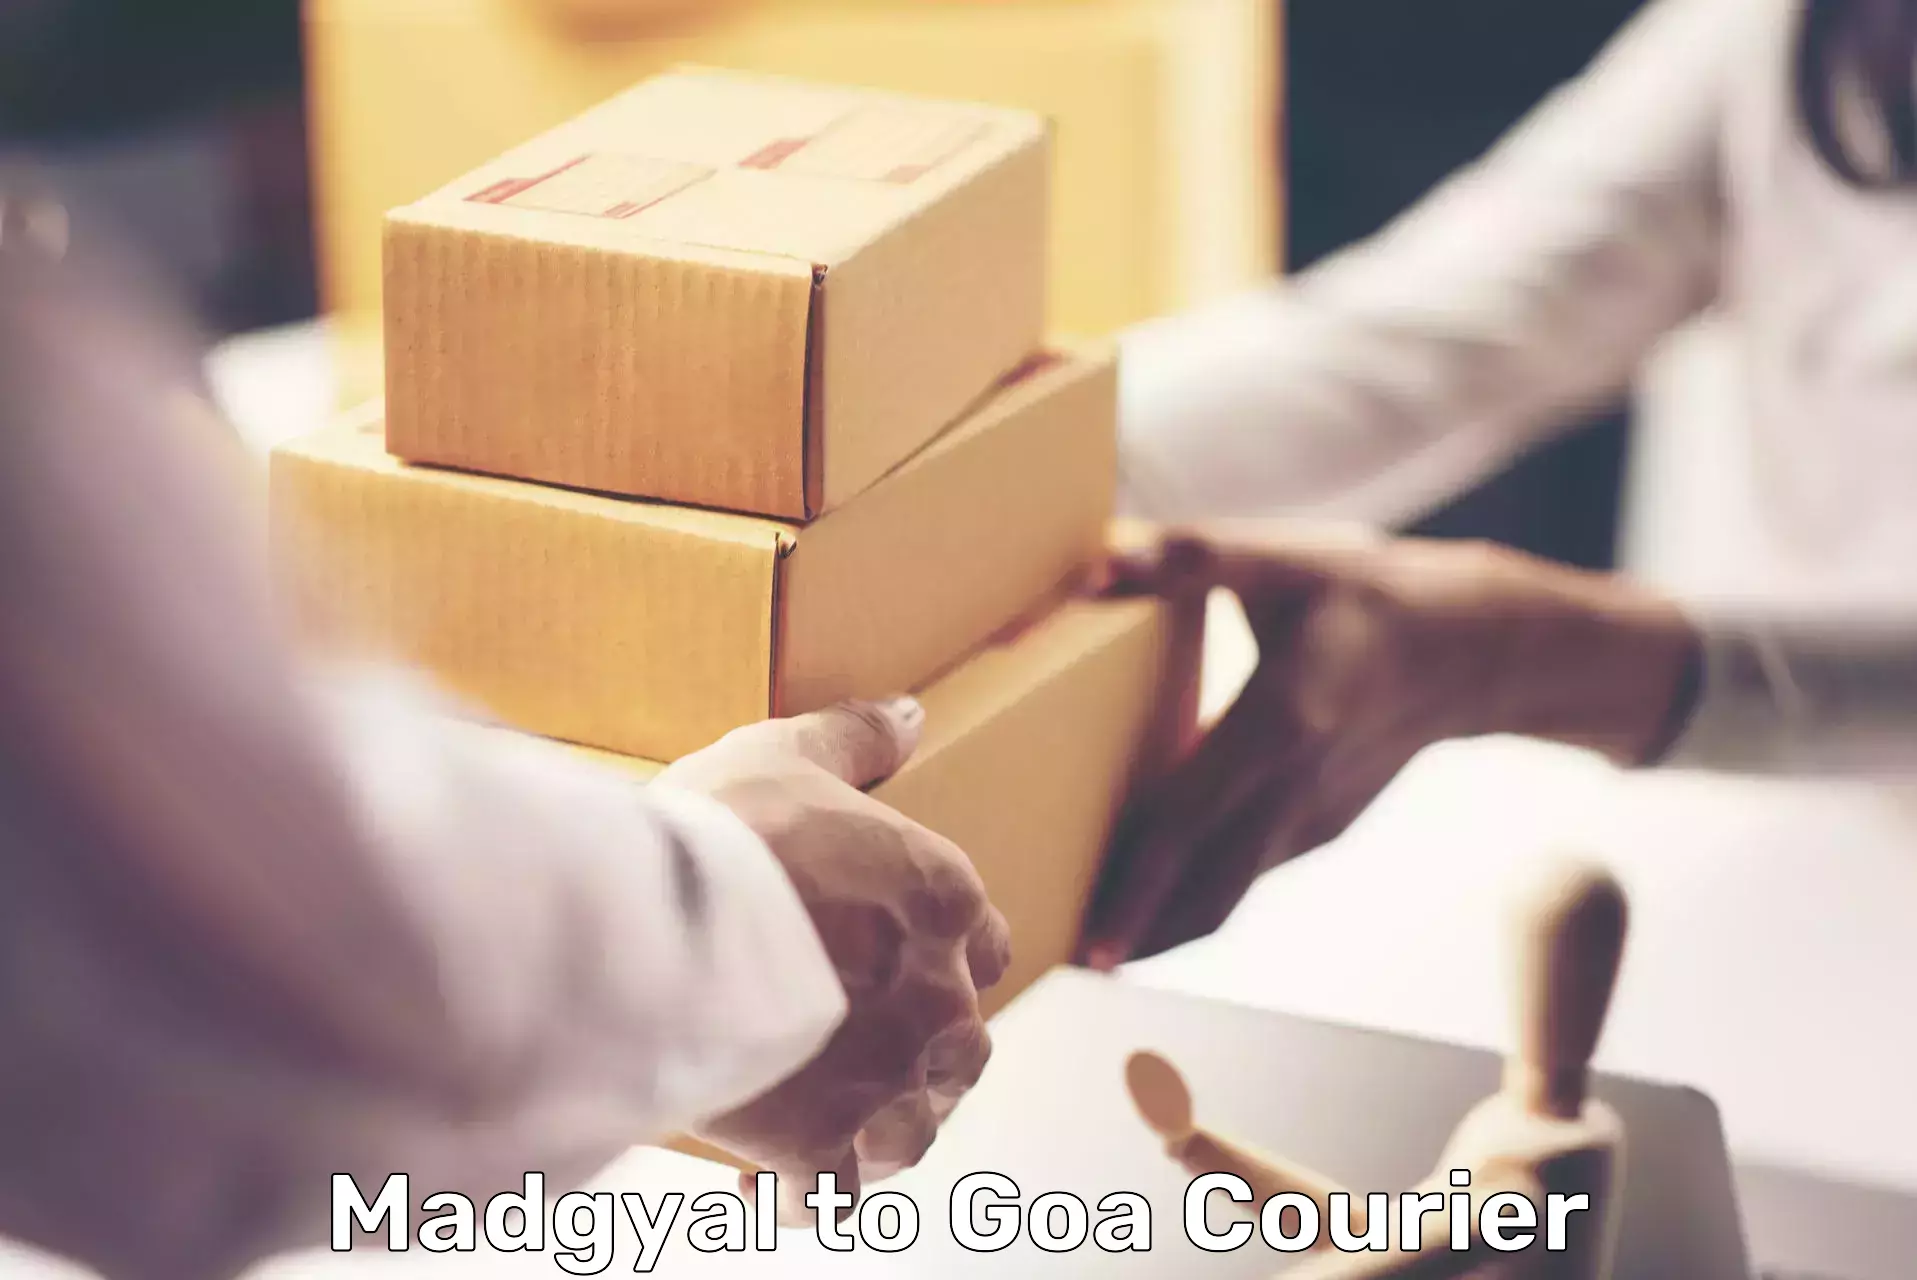 Reliable courier service Madgyal to Margao